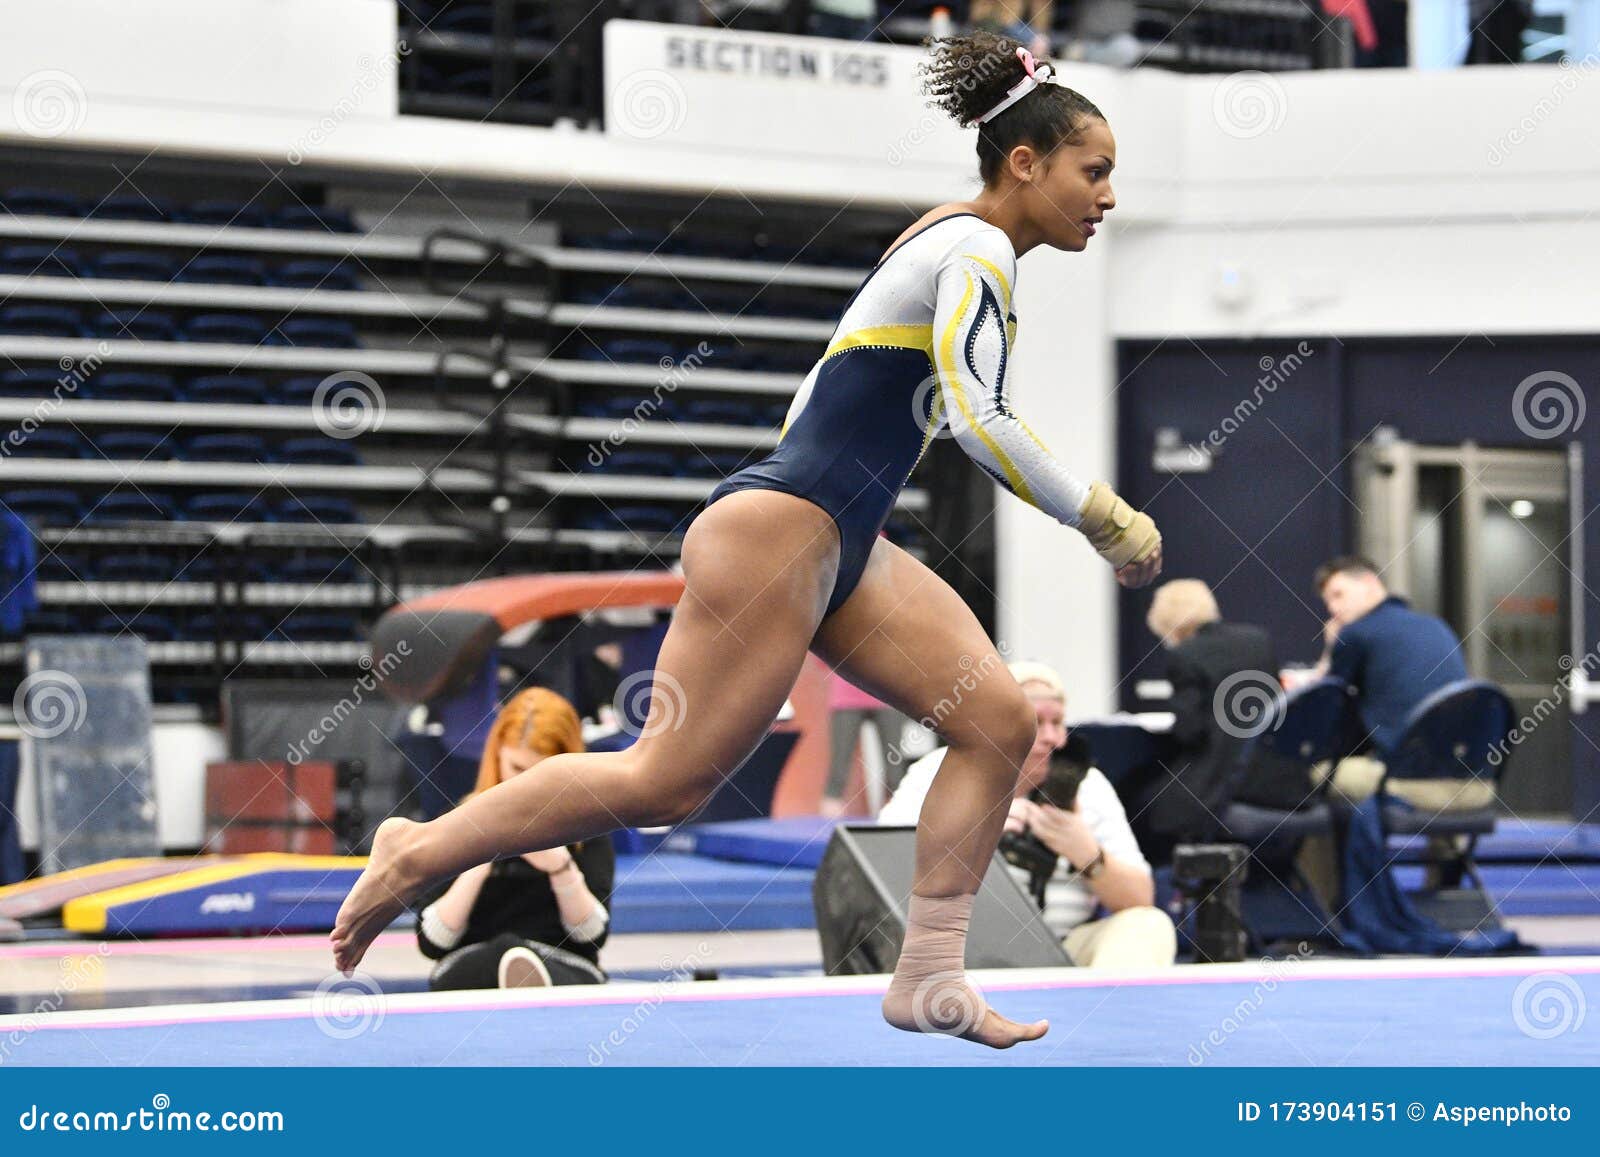 Erica Fontaine performs at a gymnastics meet held at the Smith Center in Wa...